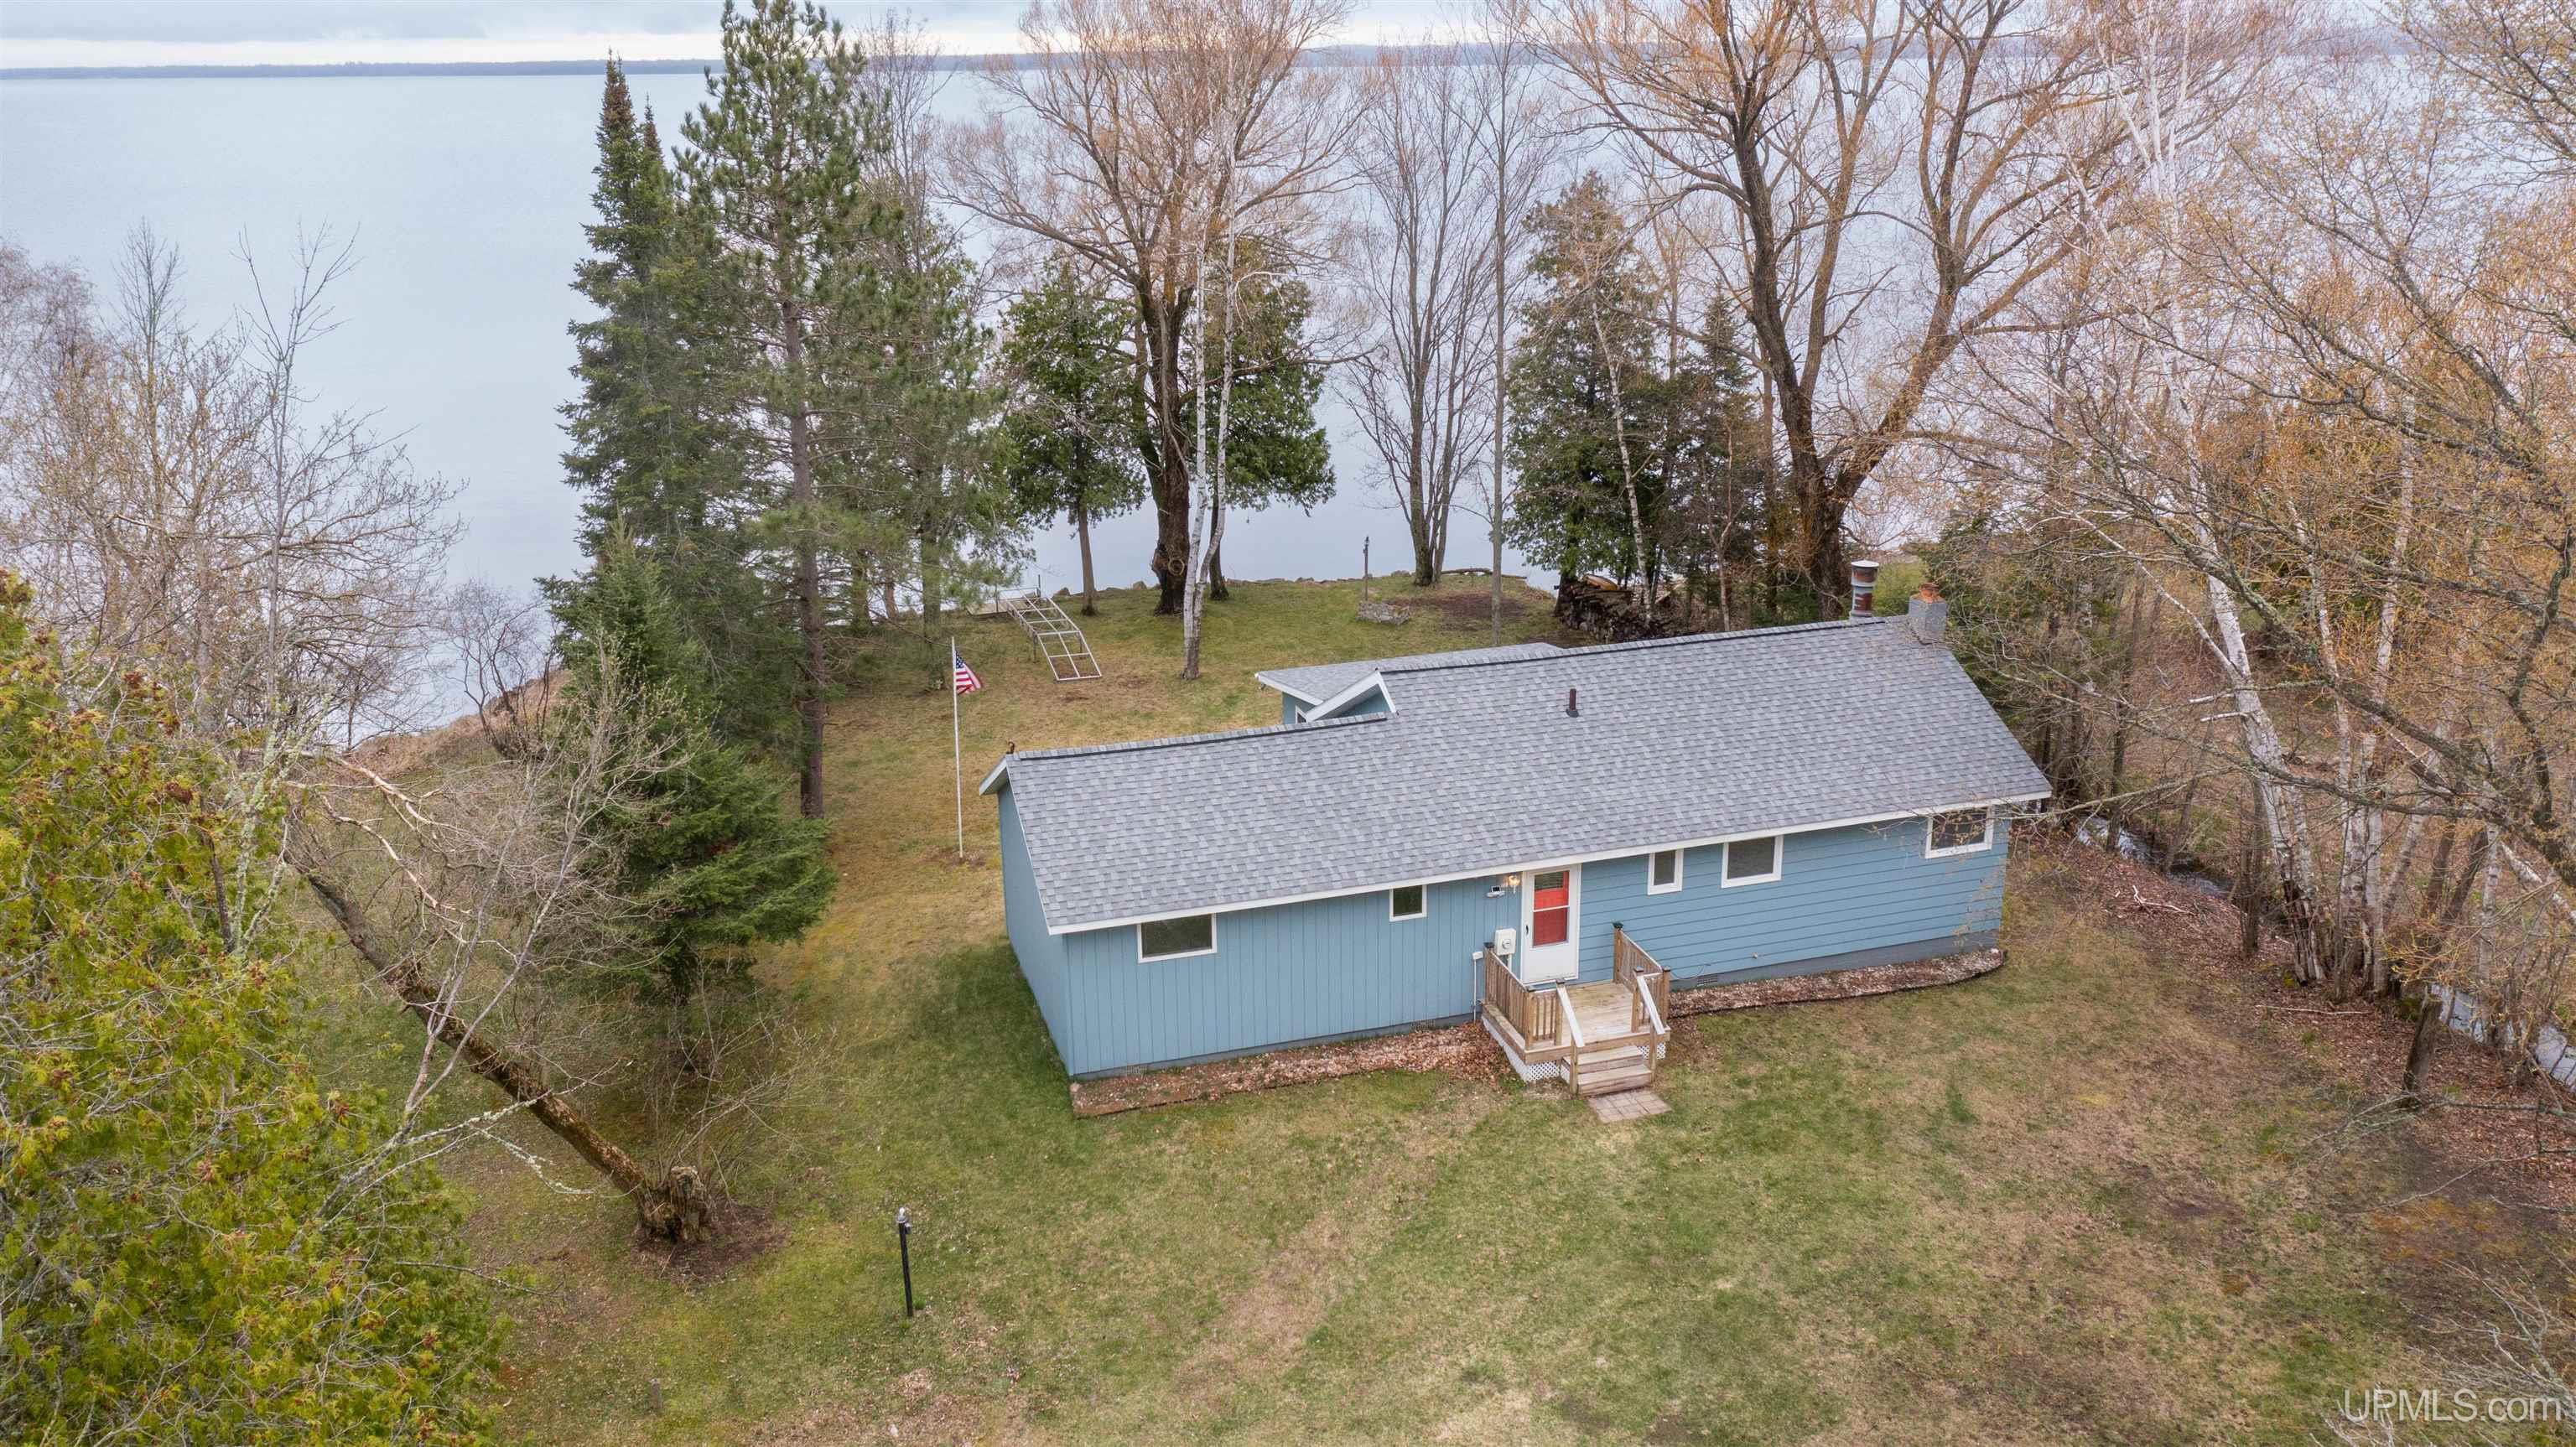 Photo # for Listing #50139598 in Manistique